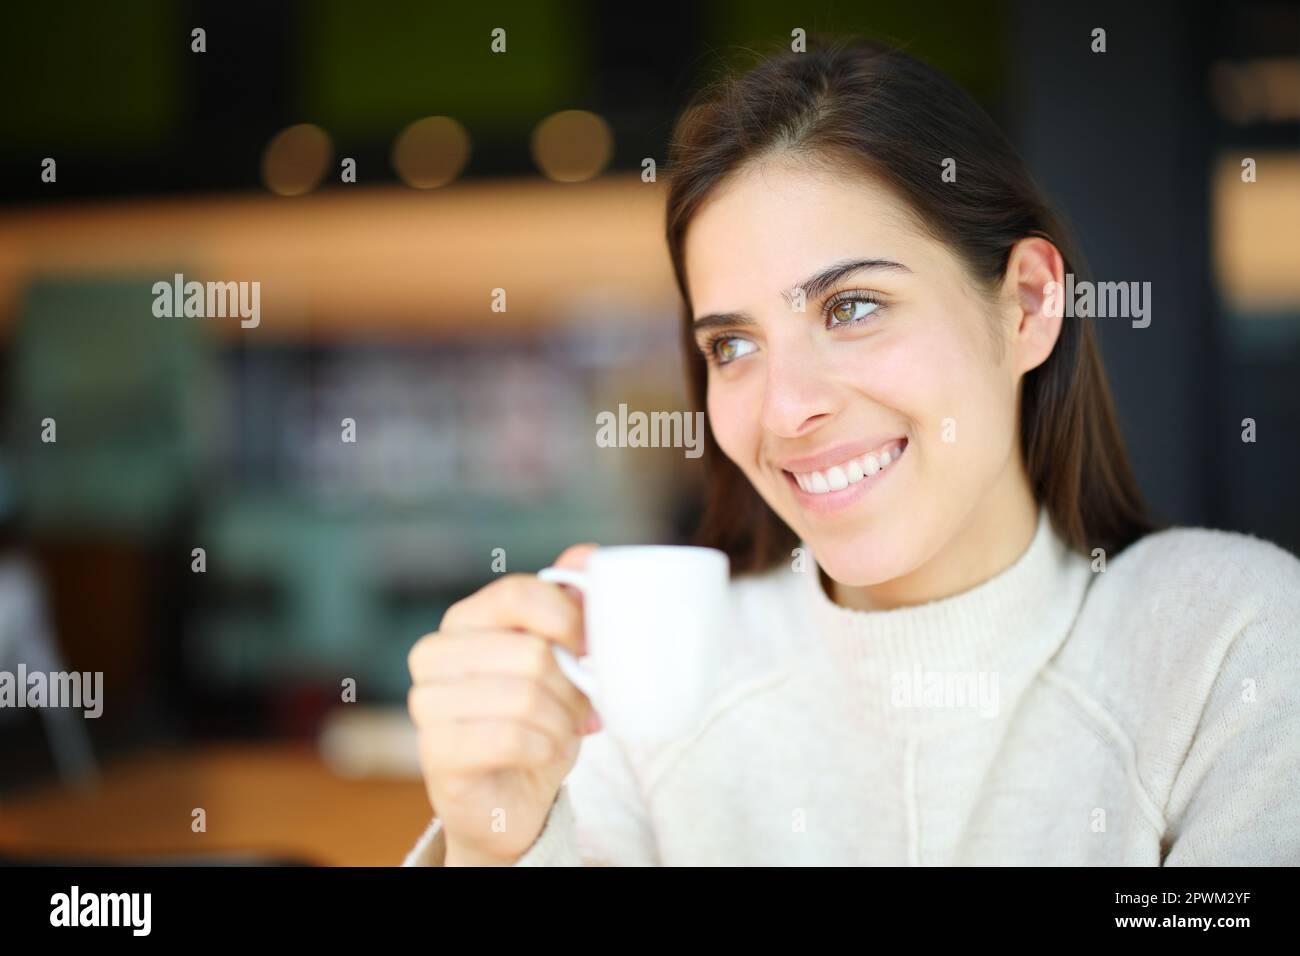 Happy woman smiling looks away holding cup in a coffee shop Stock Photo